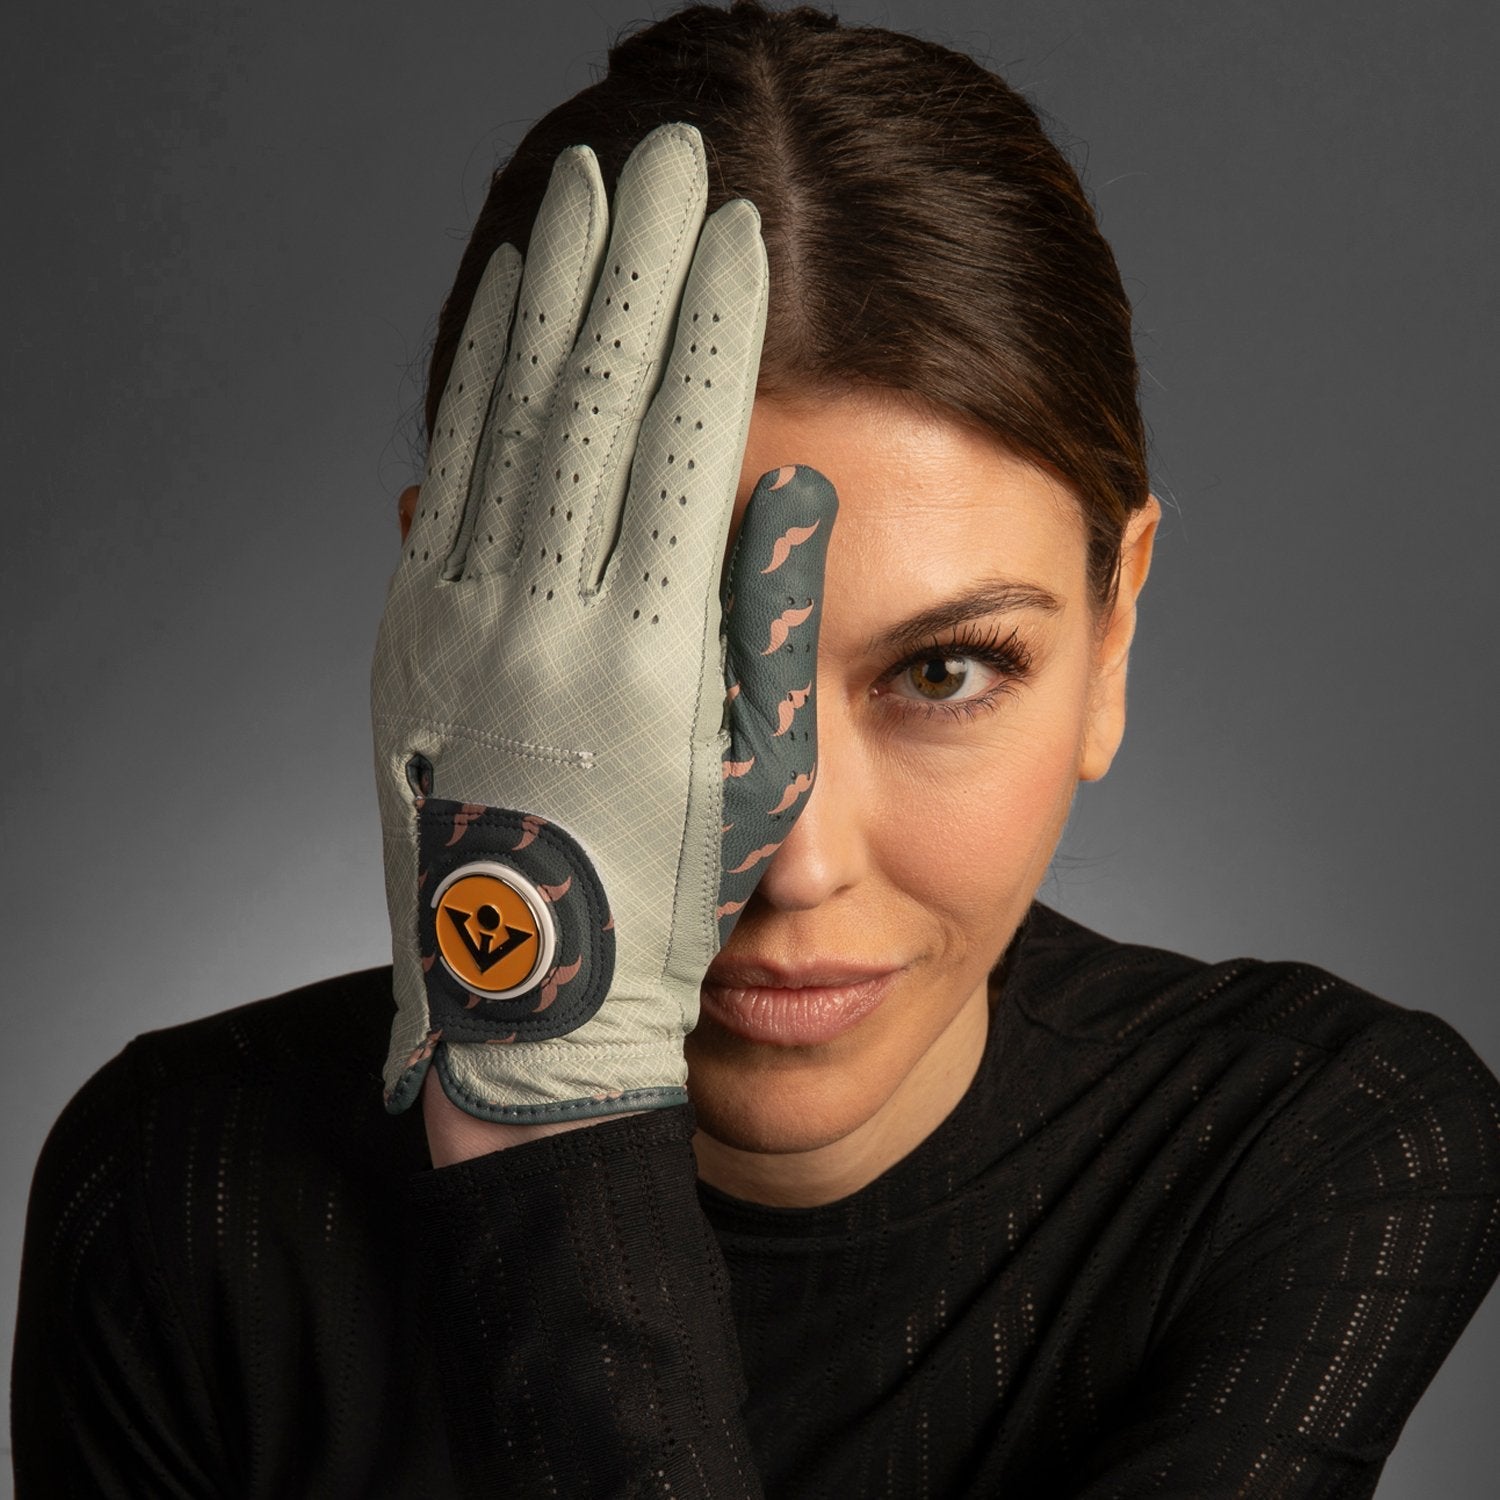 VivanTee women's Mustache Patterned golf glove in front of a models right eye with a charcoal background.